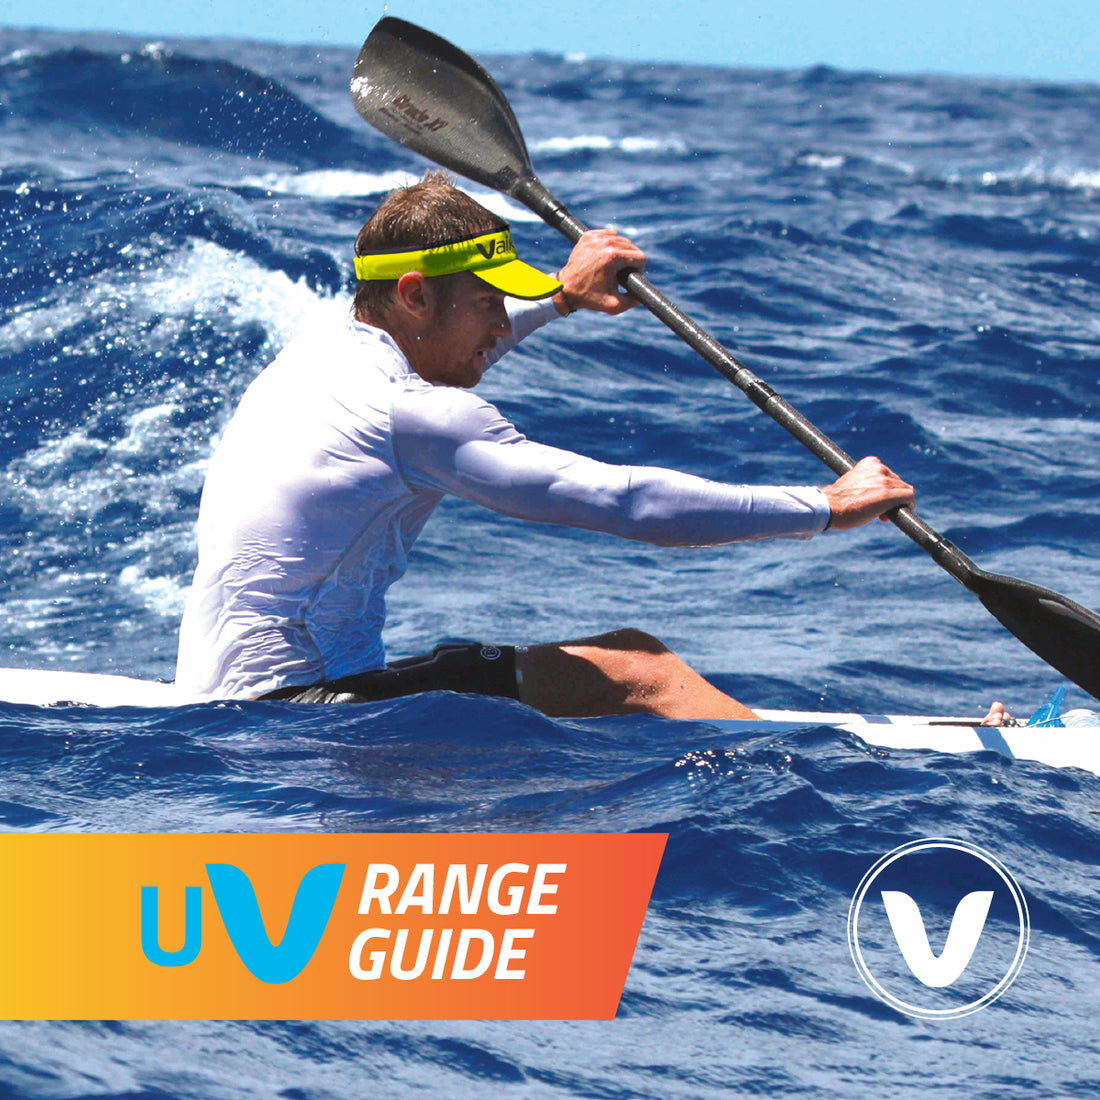 When the heat comes on, Vaikobi has you covered. Check out our UV Gear Guide.